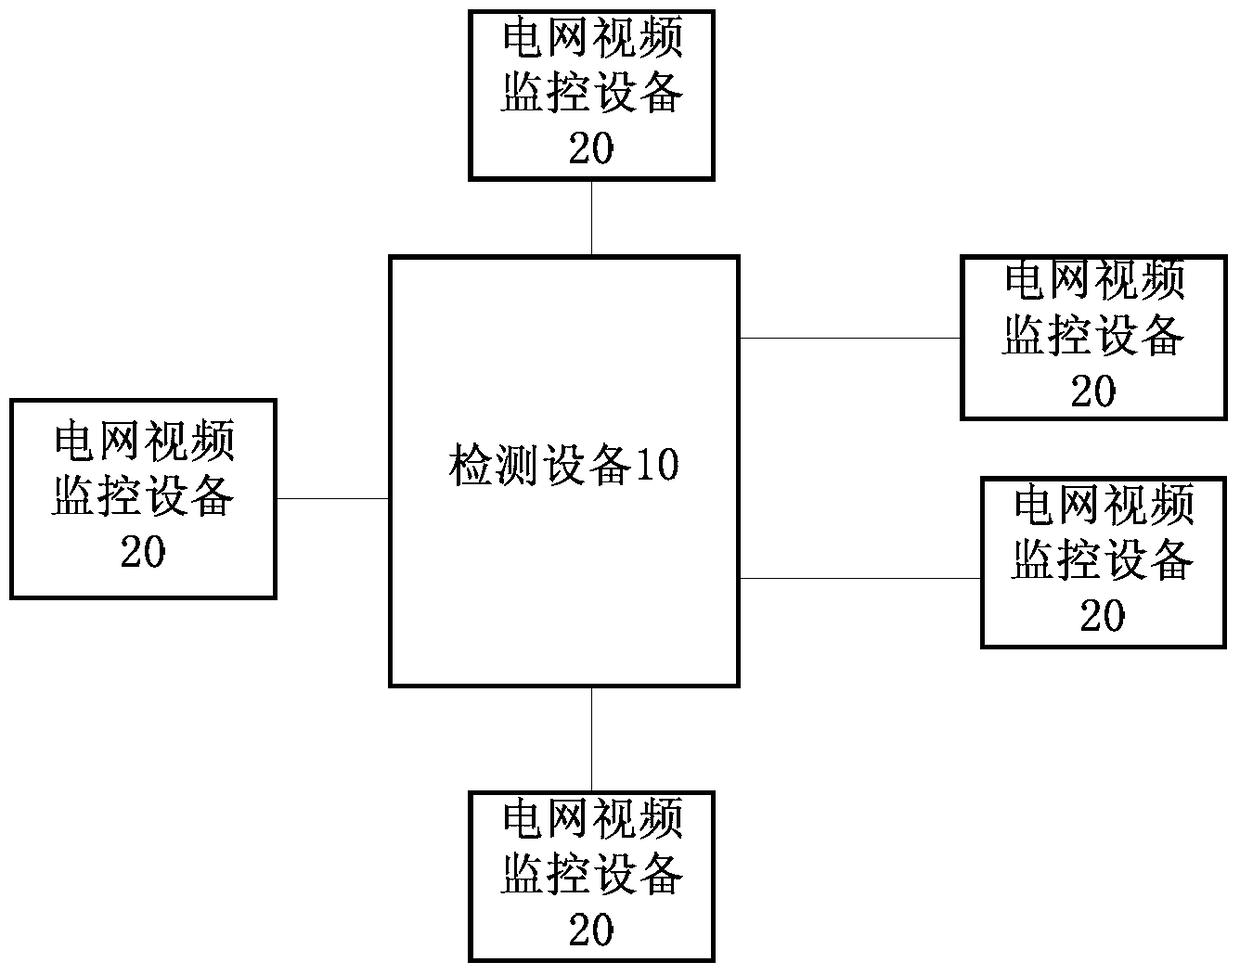 Fault detection method and device for power grid video monitoring equipment